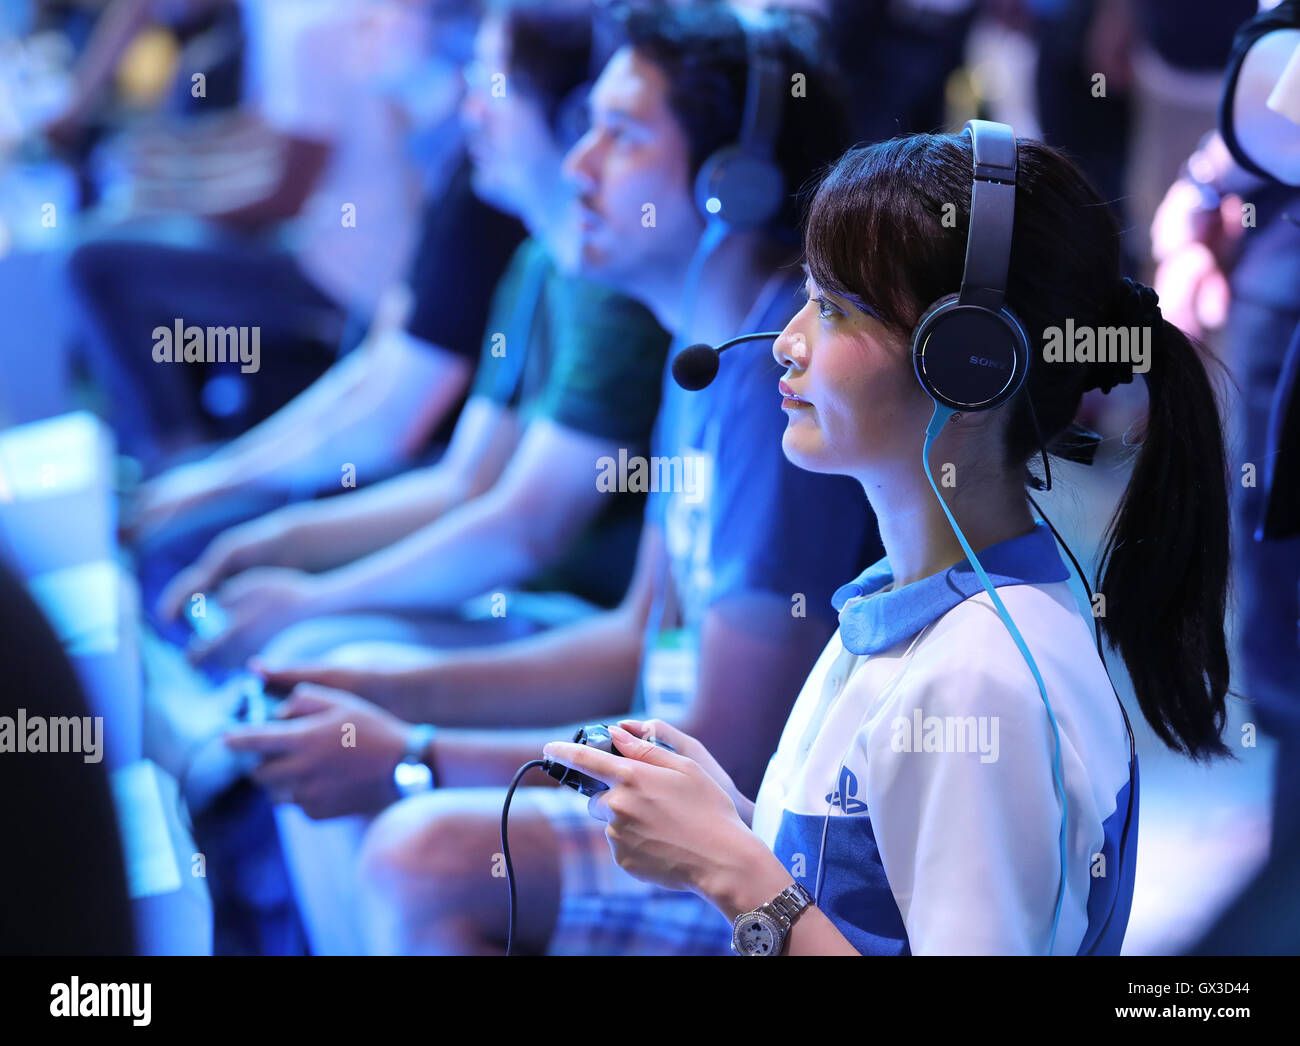 Thursday. 15th Sep, 2016. Visitors tries to play videogames with Sony Interactive Entertainment's PlayStation 4 at the annual Tokyo Game Show in Chiba, suburban Tokyo on Thursday, September 15, 2016. The 20th anniversary Show includes show a new Virtual Reality (VR) area. The event hosts 614 exhibitors from 37 different countries and runs from September 15 to 18 at the International Convention Complex Makuhari Messe in Chiba. 1,523 game titles for smartphones, games consoles, PC and VR platforms are on show. Credit:  Yoshio Tsunoda/AFLO/Alamy Live News Stock Photo